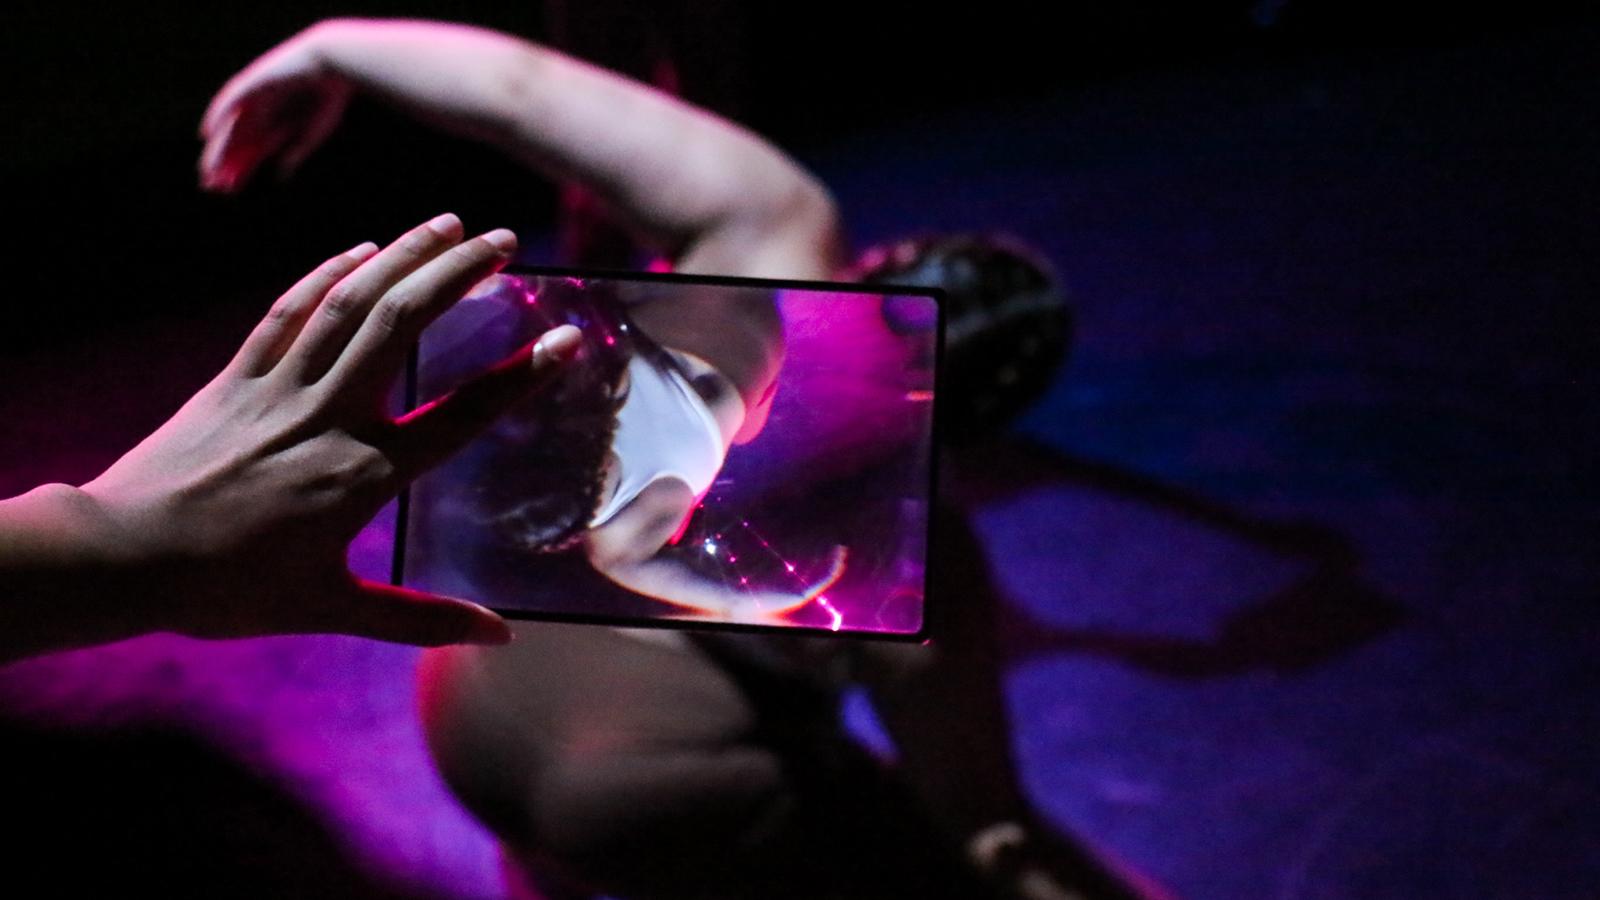 dancer performing and recorded on handheld device